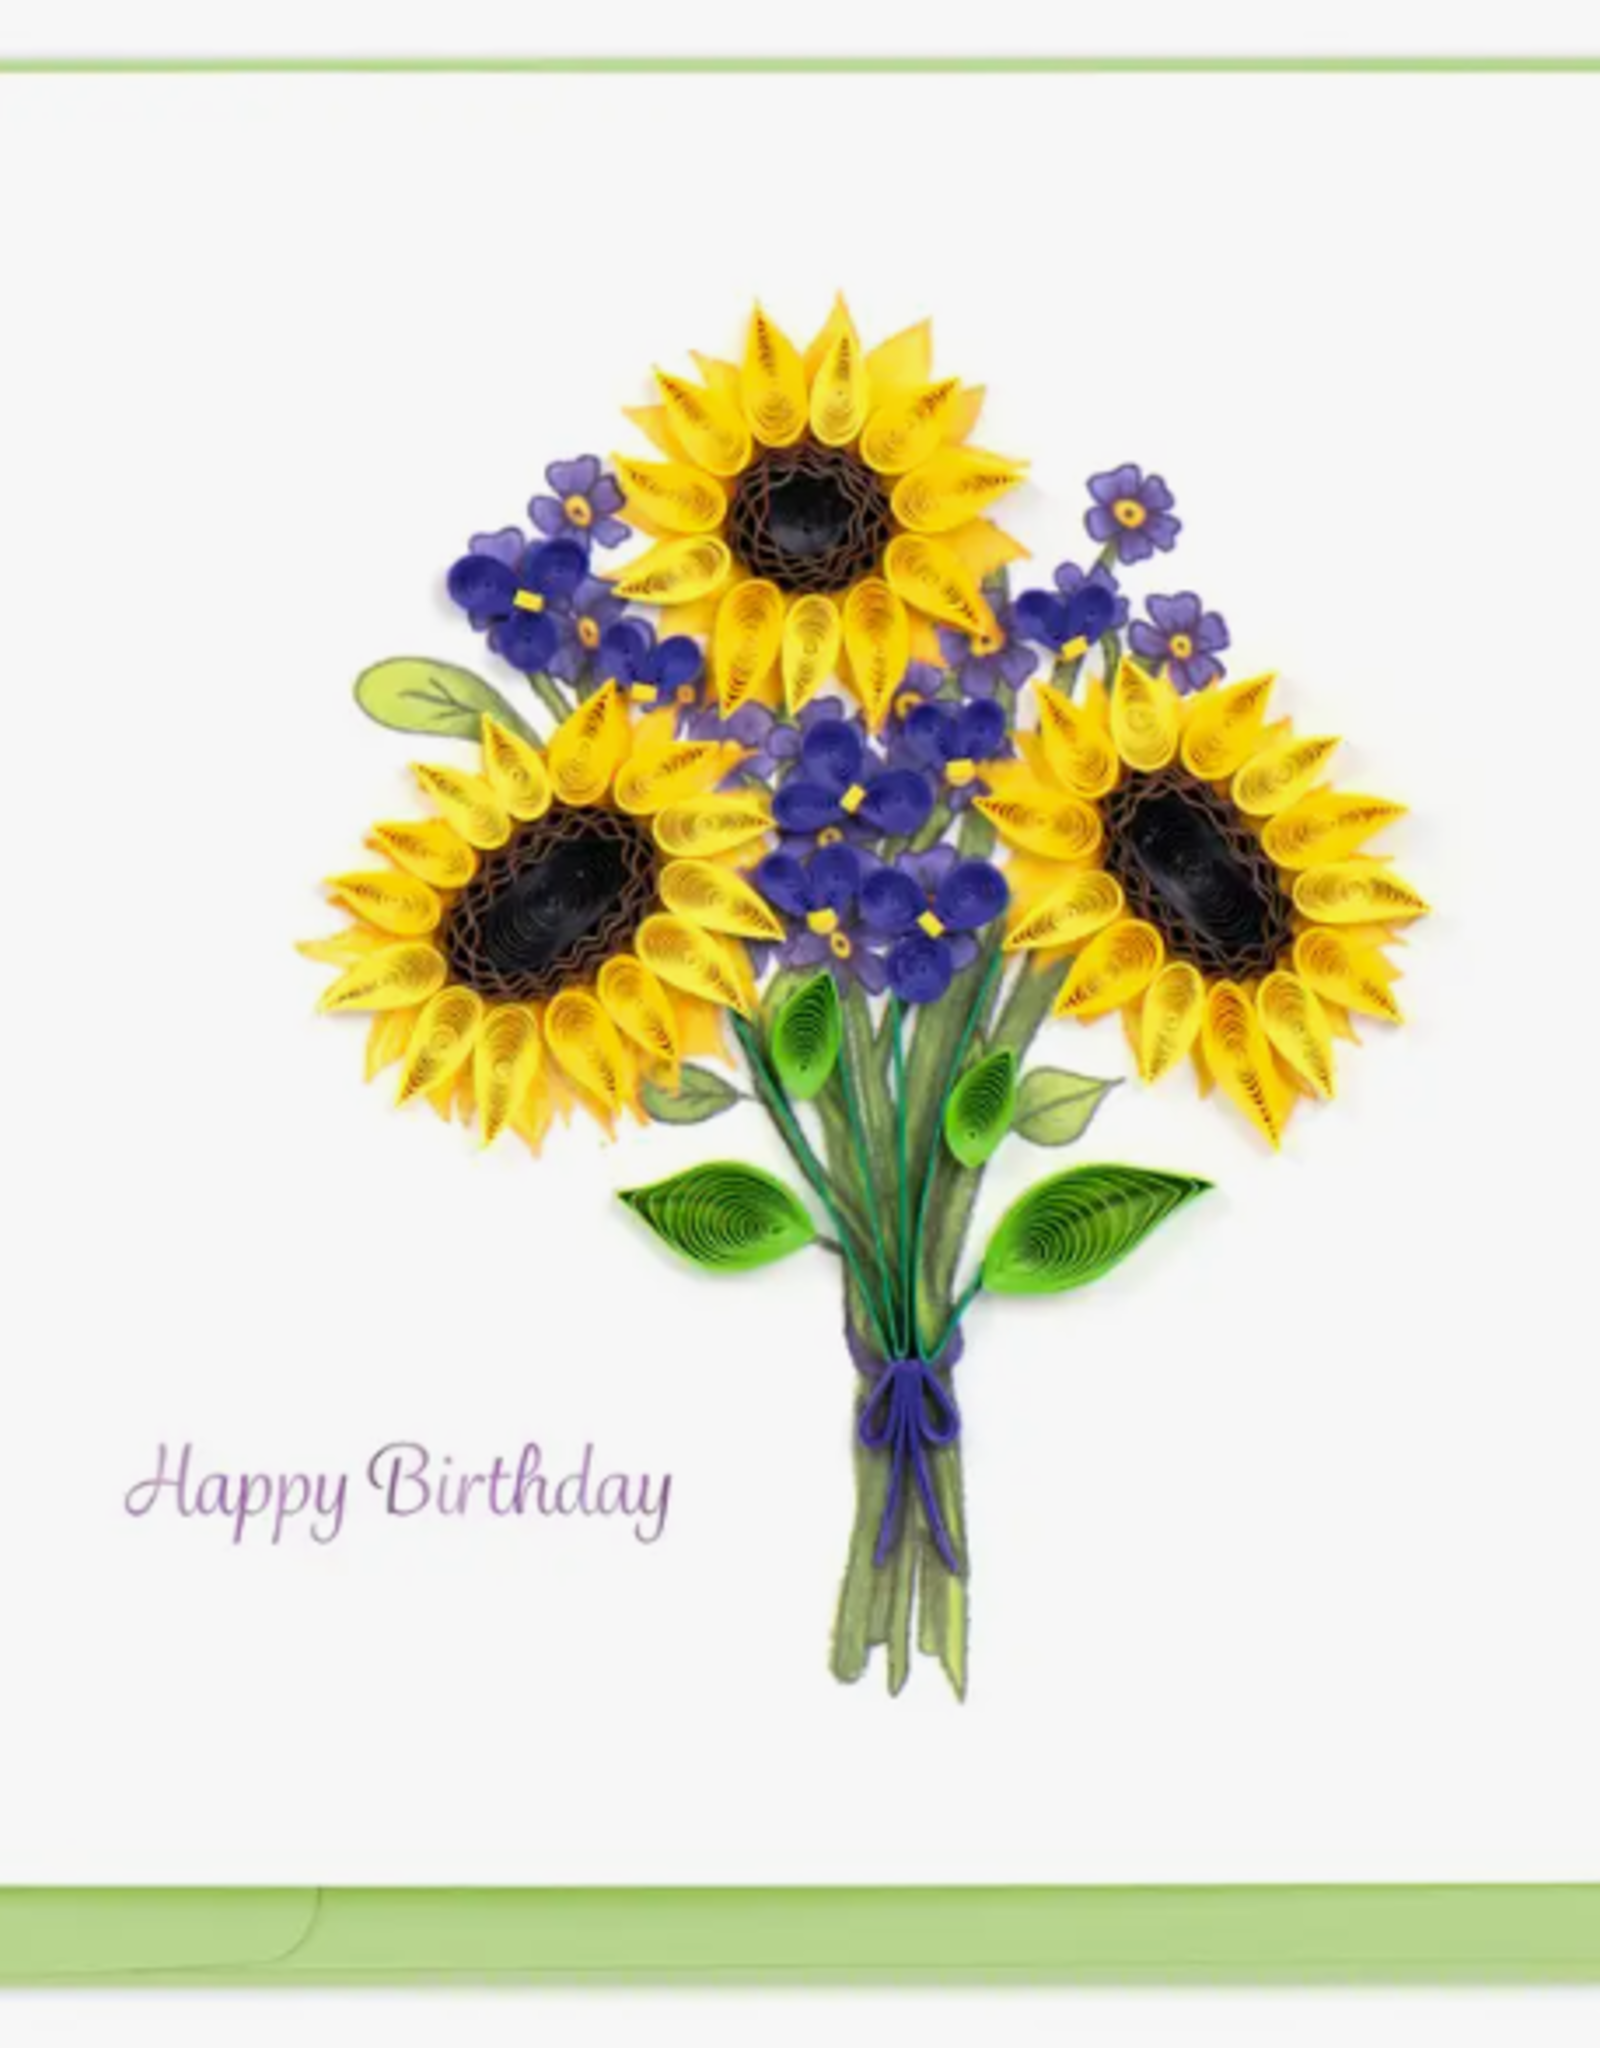 Quilling Card Quilled Birthday Sunflower Bouquet Greeting Card